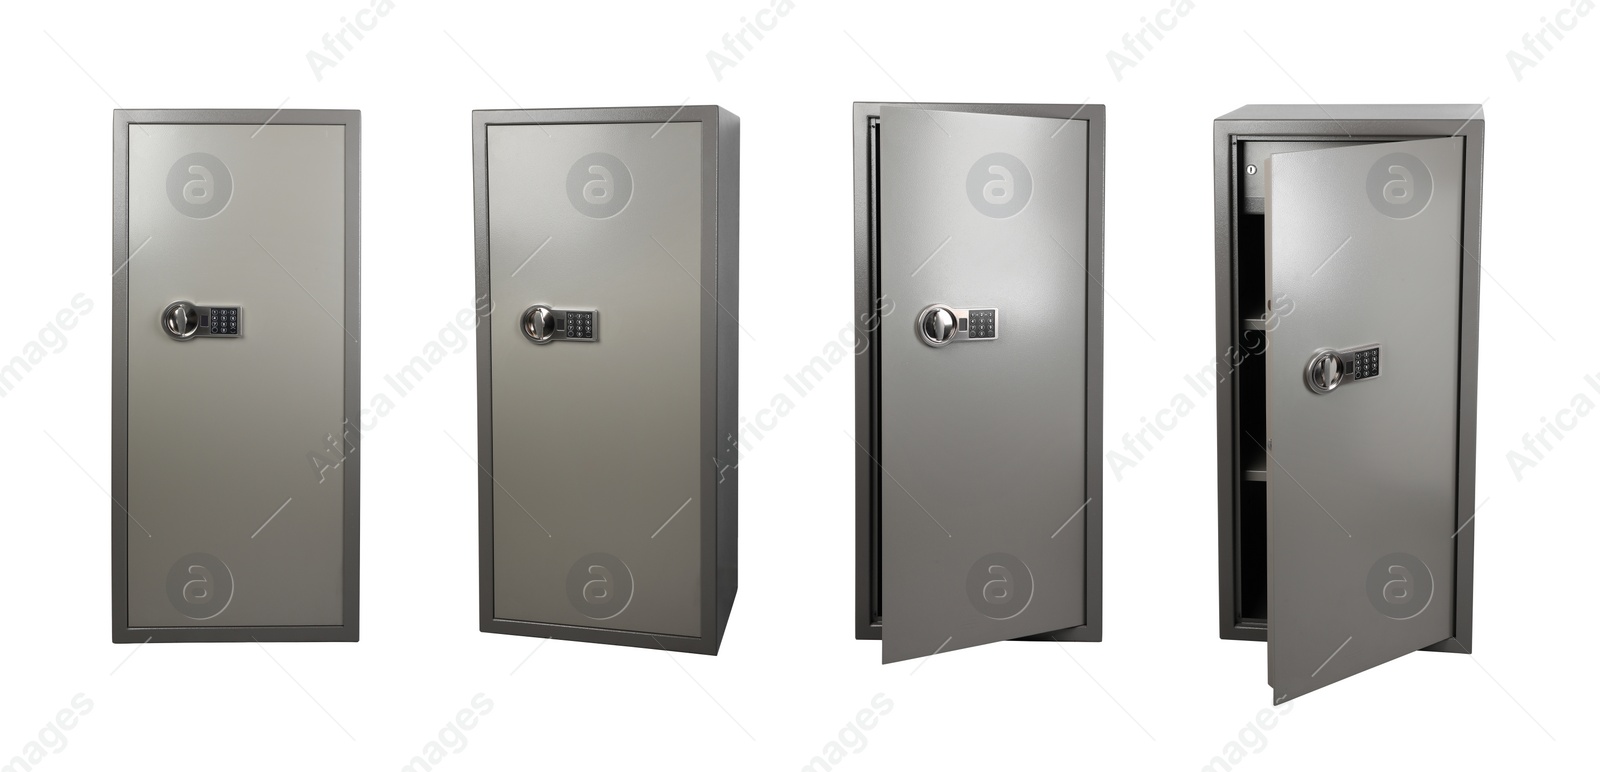 Image of Grey steel safe on white background, view from different sides